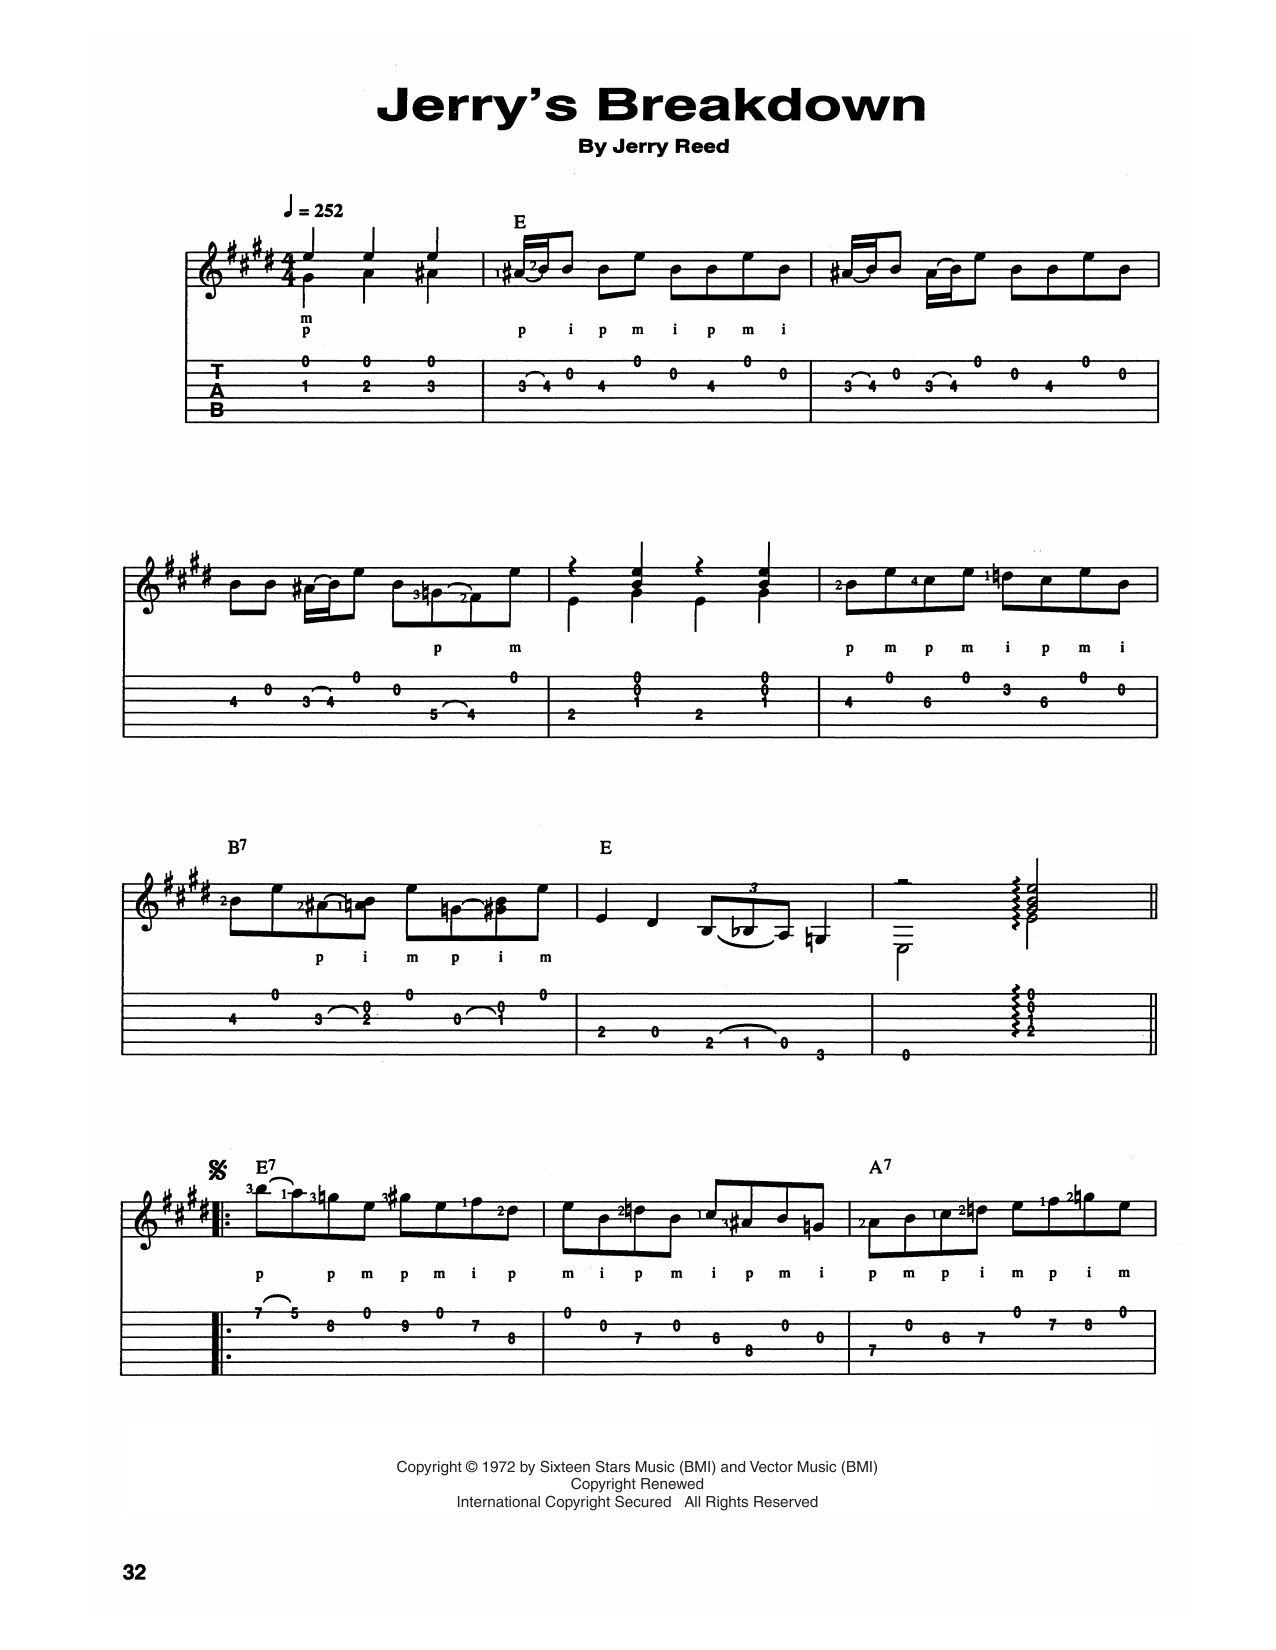 Download Chet Atkins and Jerry Reed Jerry's Breakdown Sheet Music